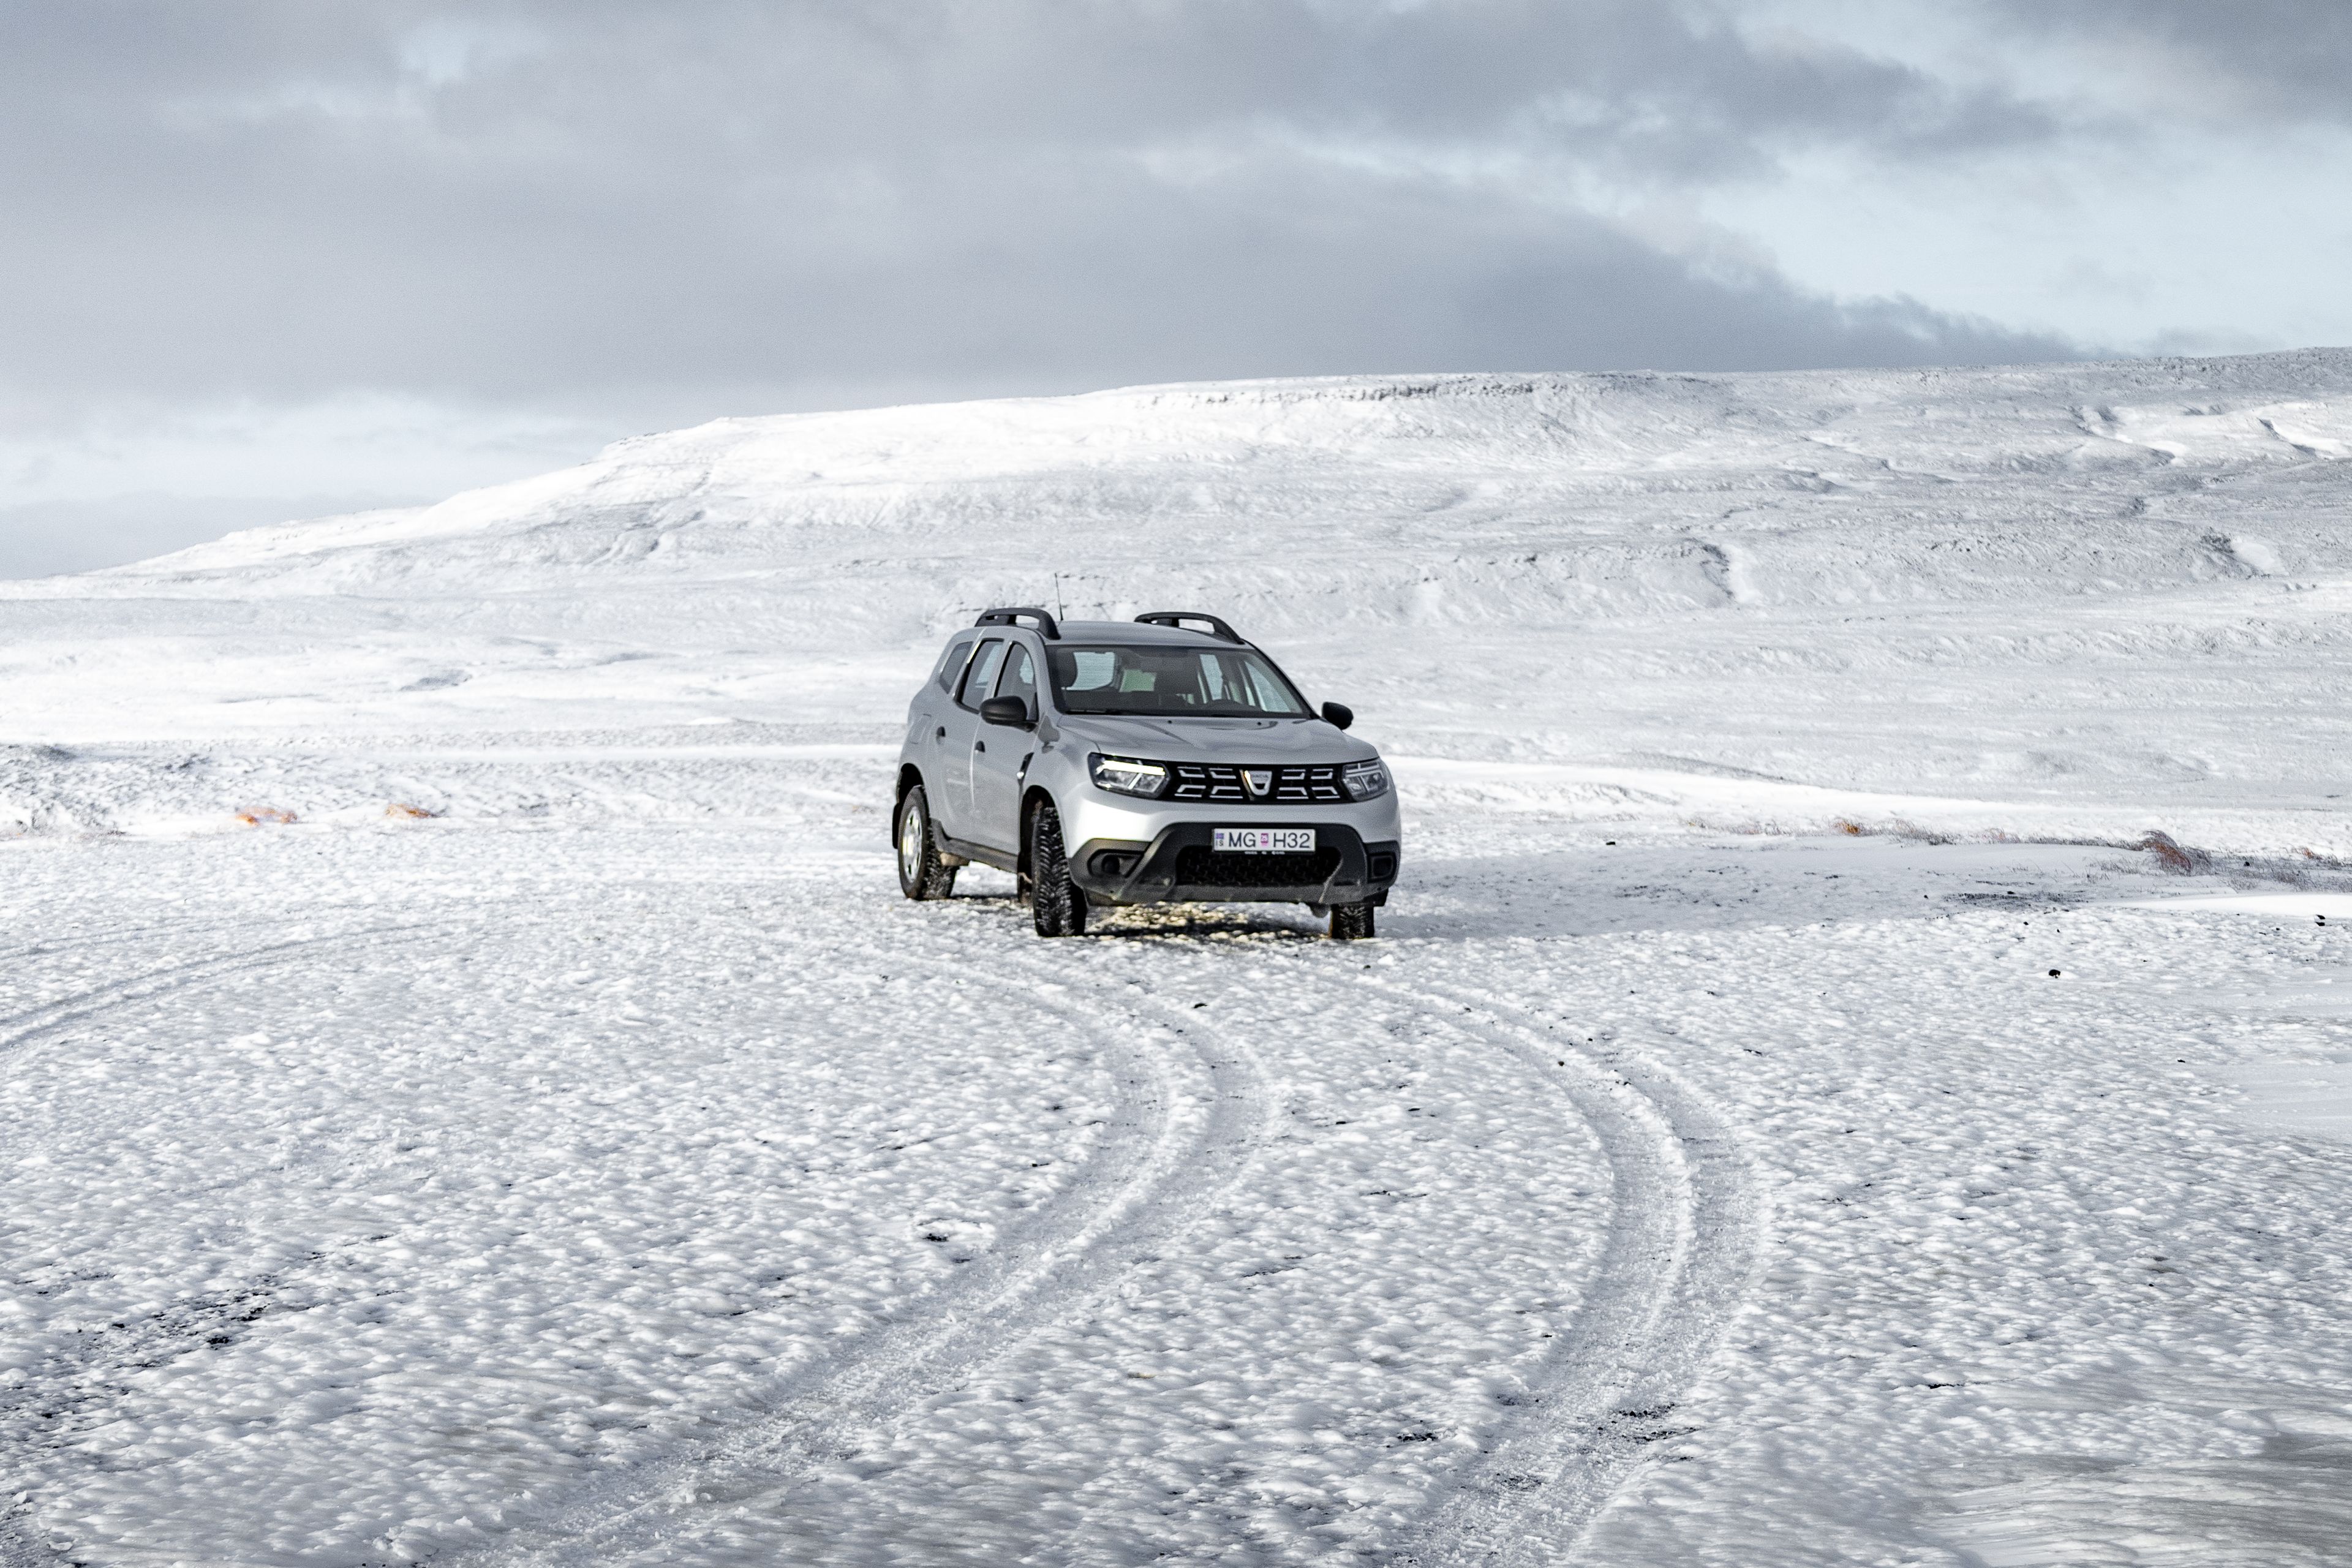 A Dacia Duster driving in winter in Iceland